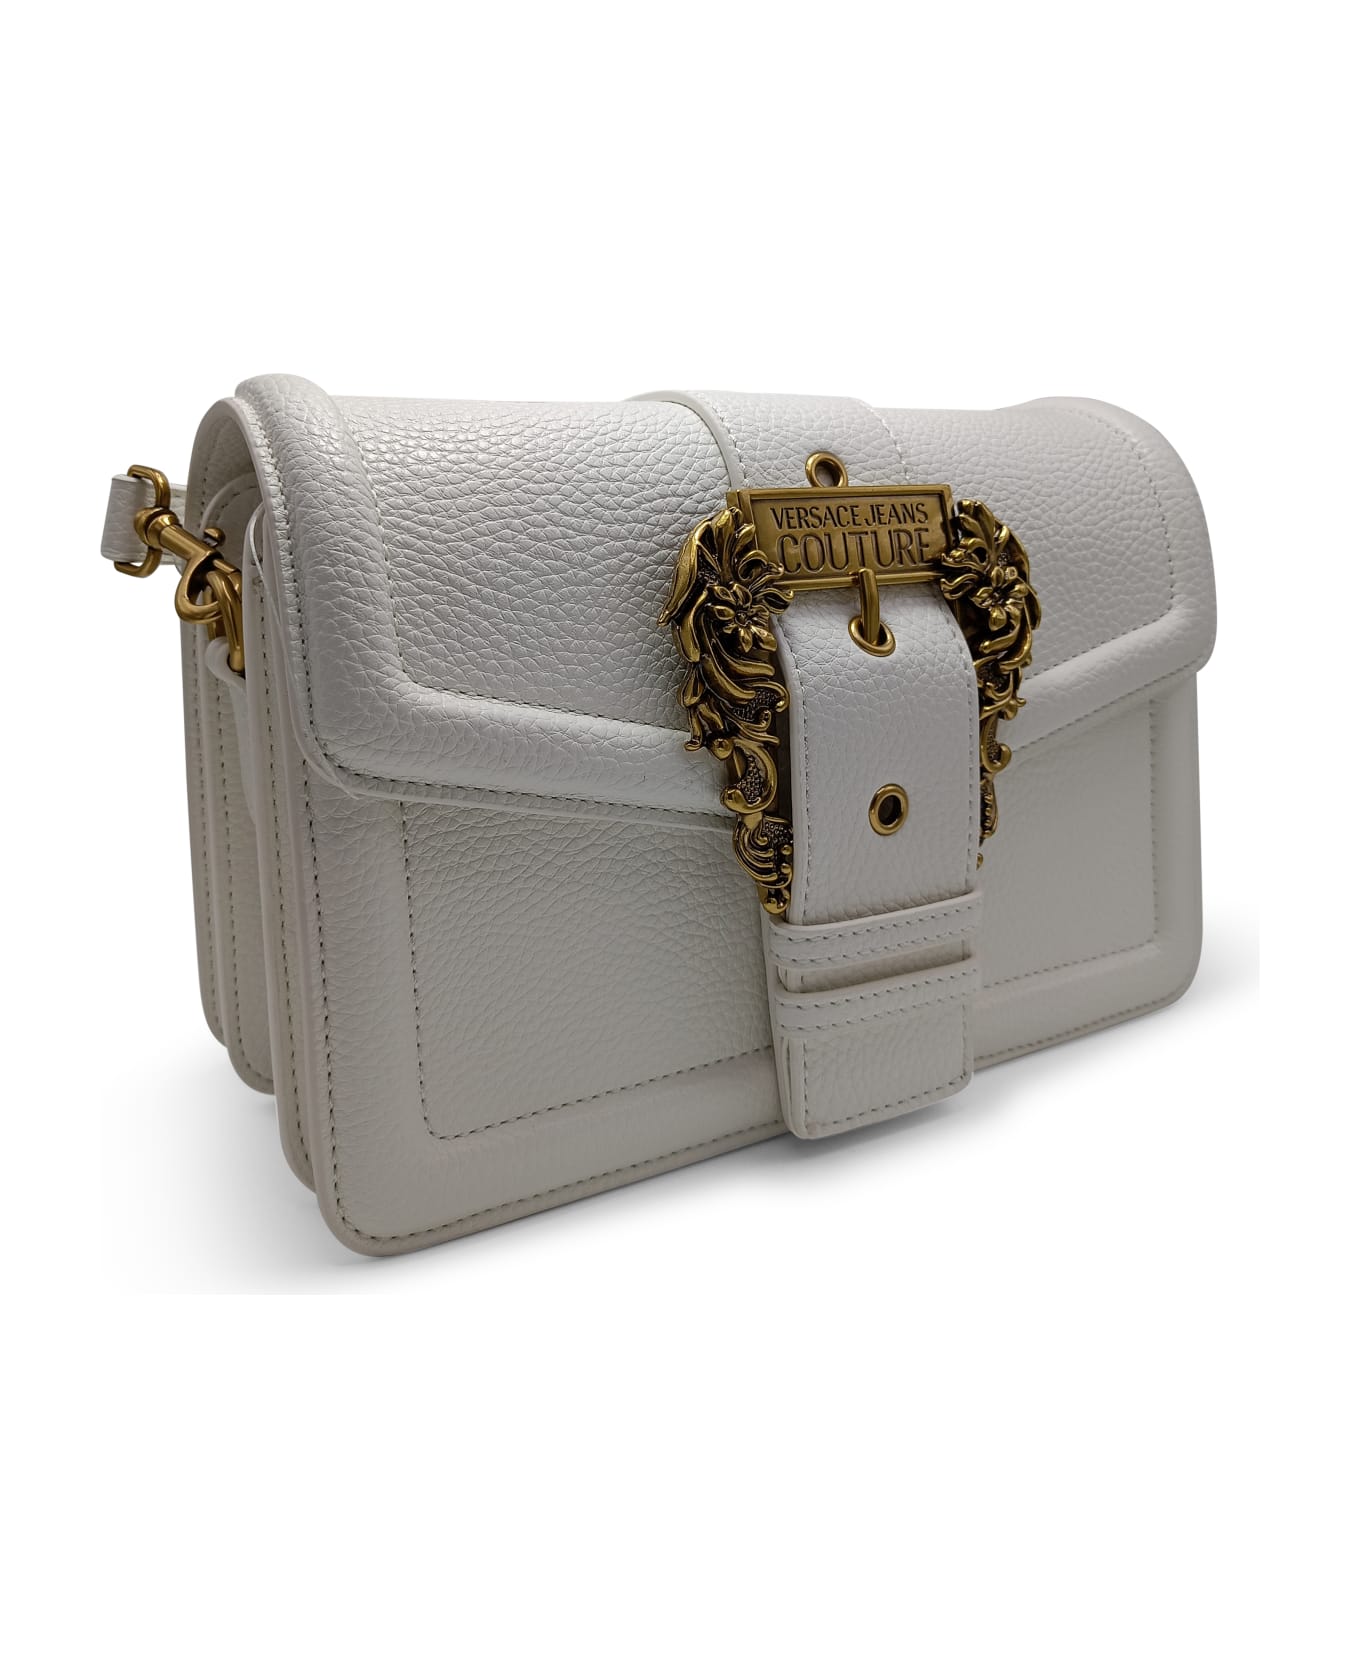 Versace Jeans Couture Bag - Bianco ショルダーバッグ